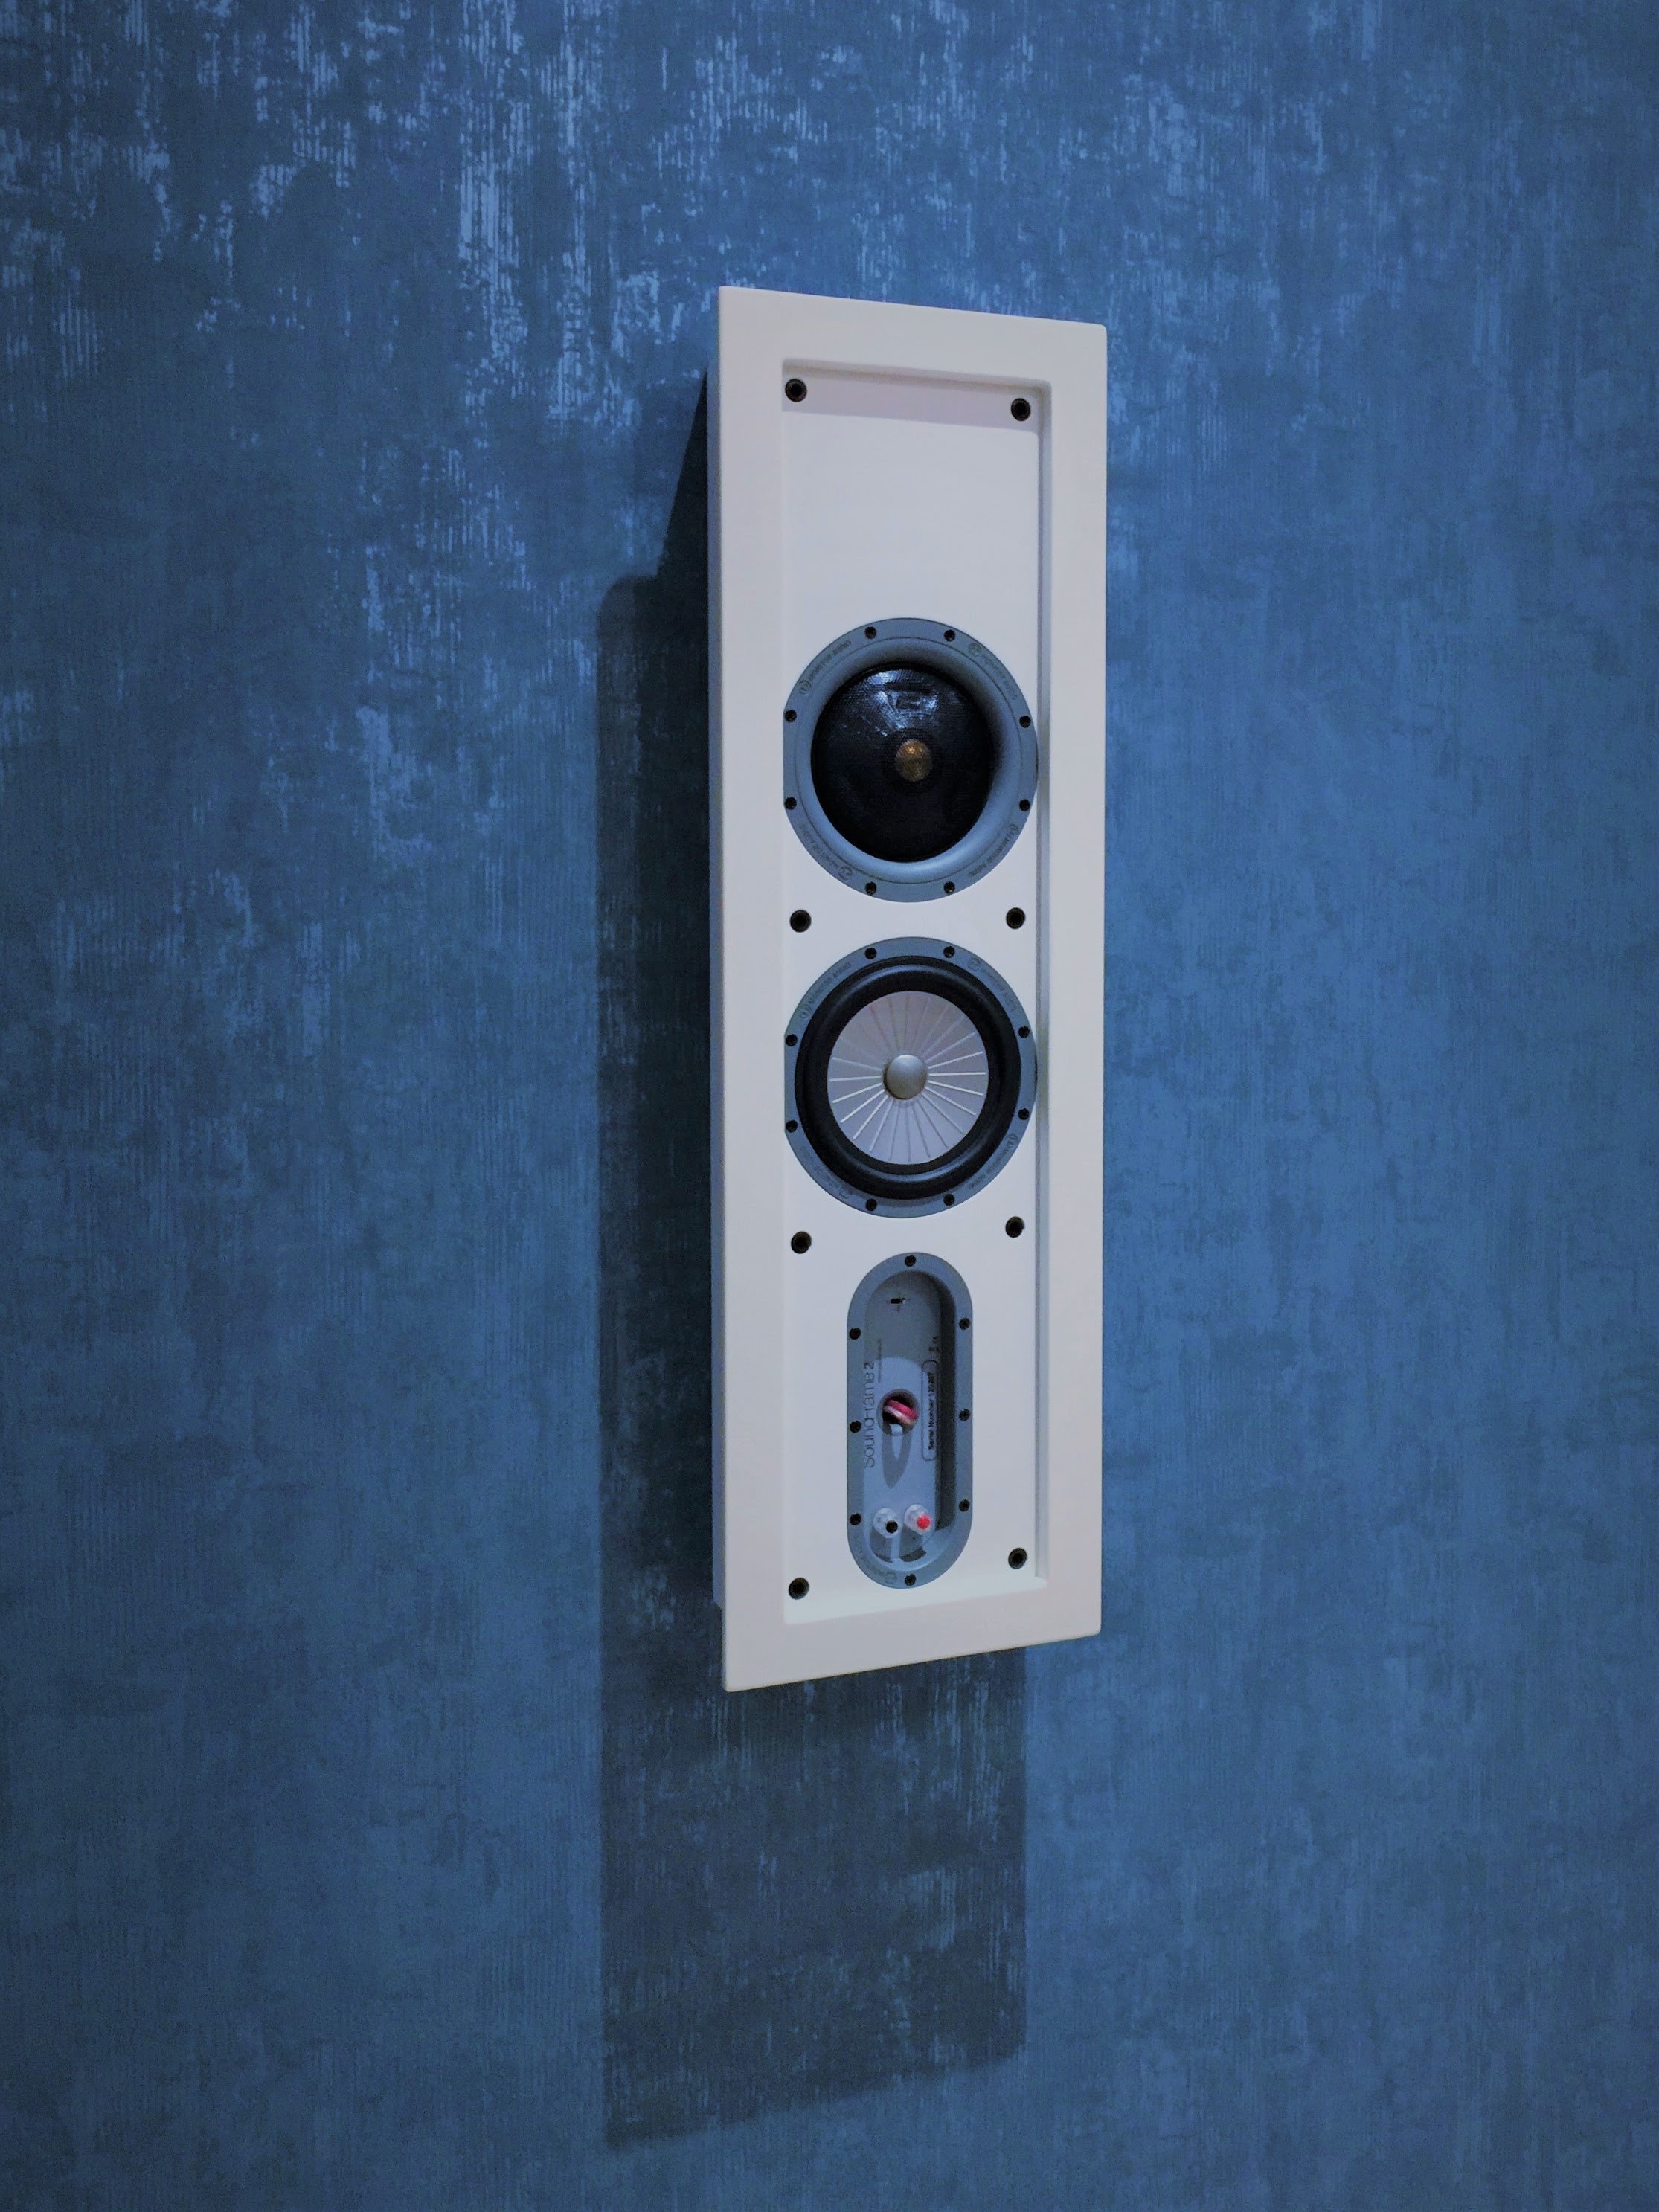  More than just a work of art... The Monitor Audio SoundFrame is the perfect fit for any room where hi-fi sound quality must blend seamlessly into the room design. It incorporates 3 way full-range sound featuring a 4" mid-range/1" tweeter module and 